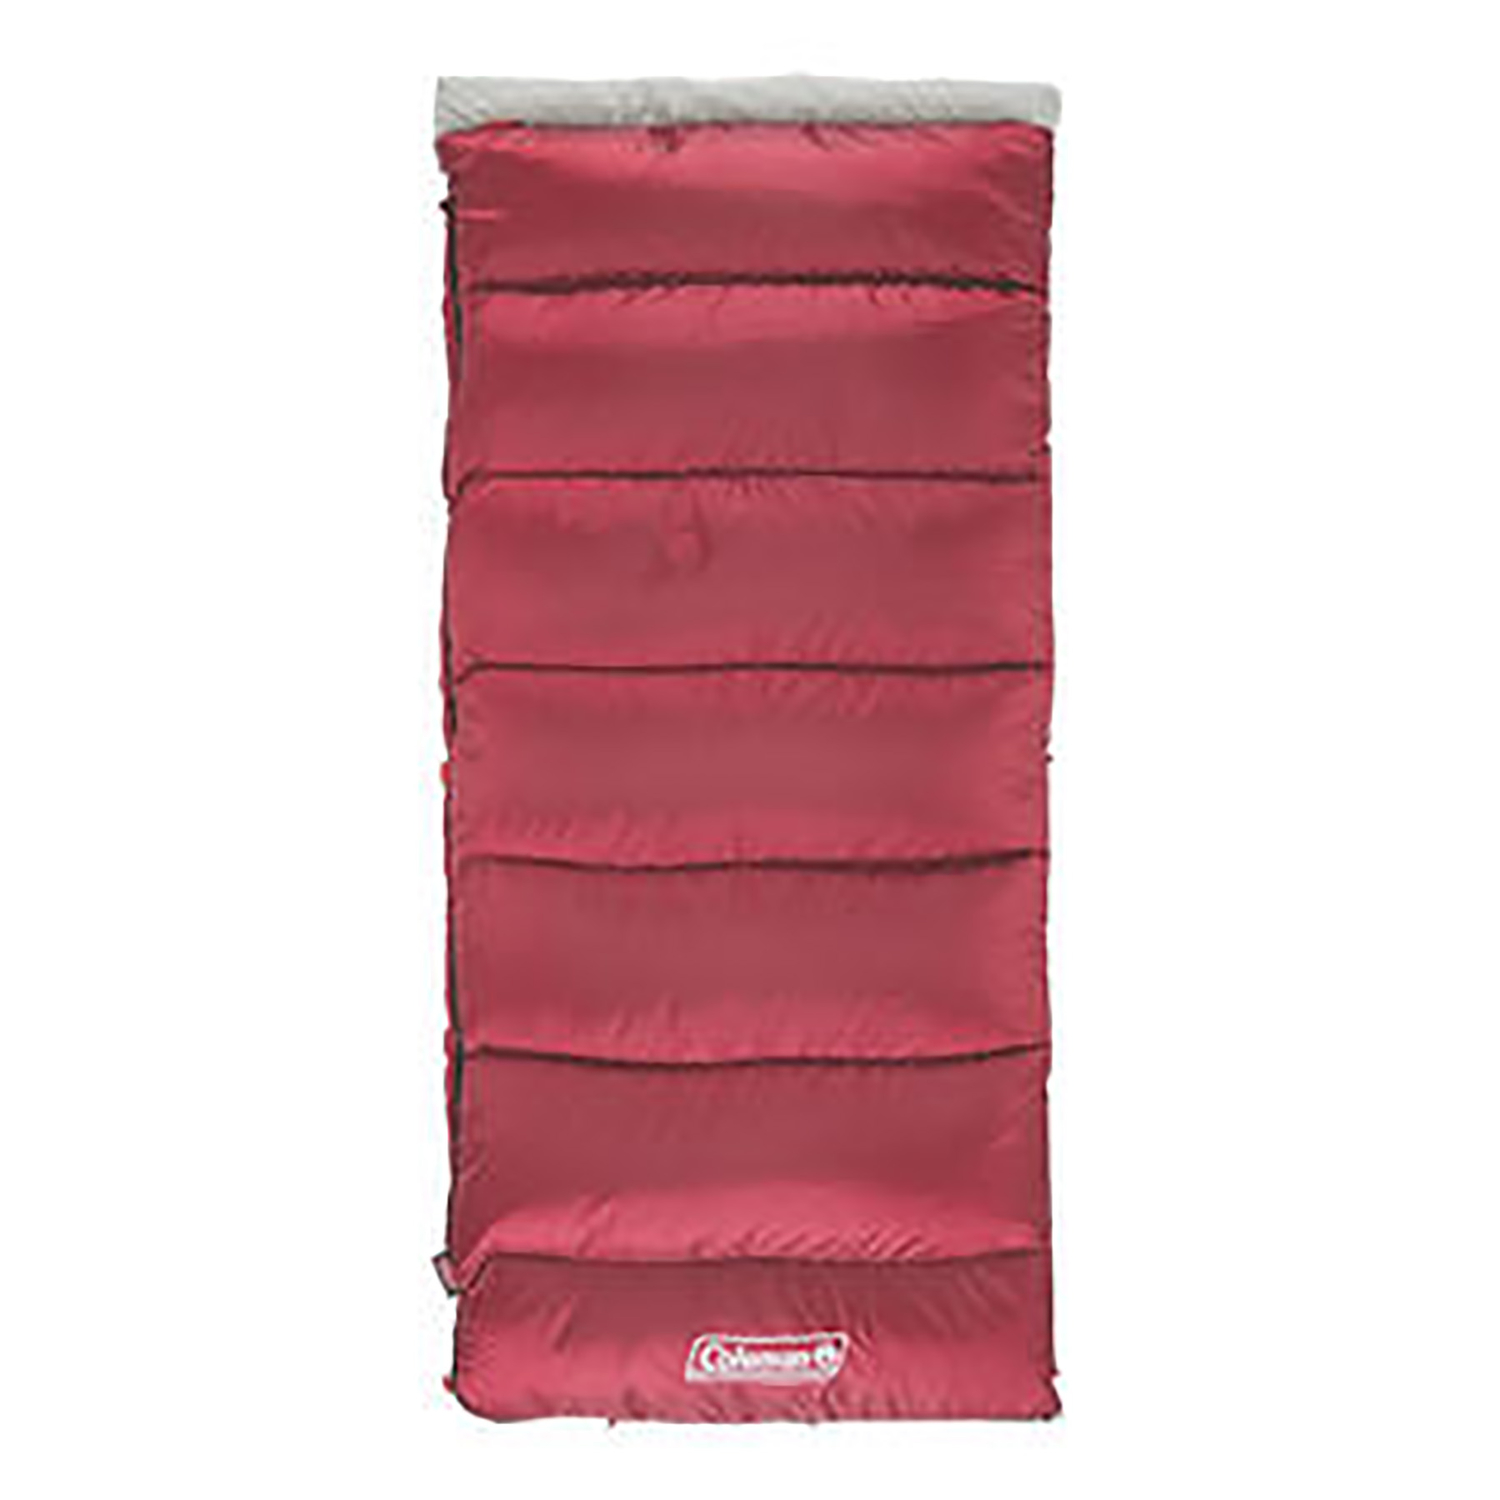 Photo 1 of (READ FULL POST) Coleman Aspen Meadows Red Sleeping Bag 2 in. H x 33 in. W x 75 in. L 1 pk